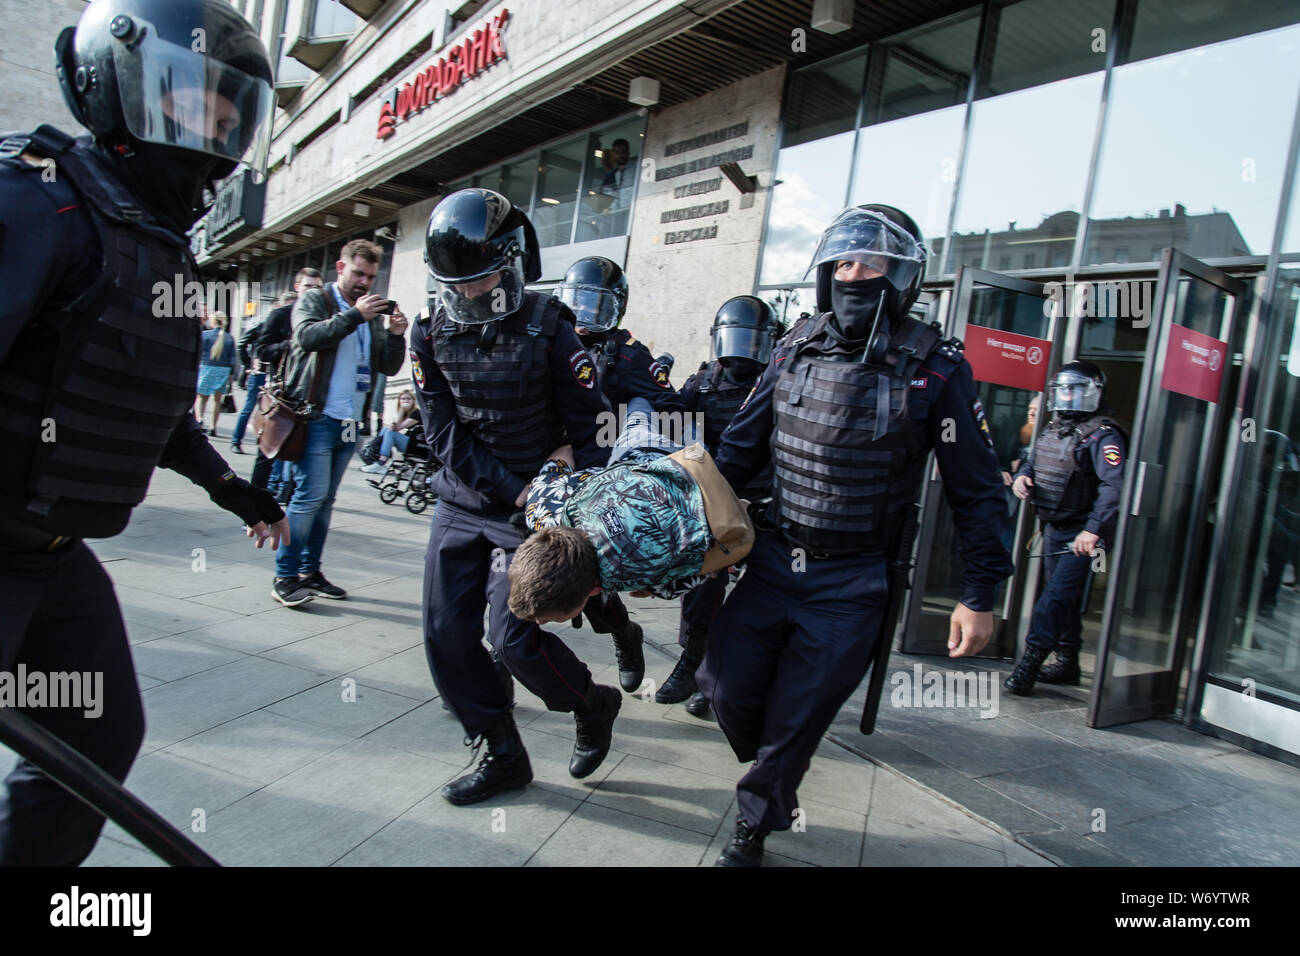 Police officers detain a man during an unsanctioned rally in the centre of Moscow, Russia.Moscow police detained more than 300 people who were protesting against the exclusion of some independent and opposition candidates from the city council ballot, a monitoring group said. Stock Photo